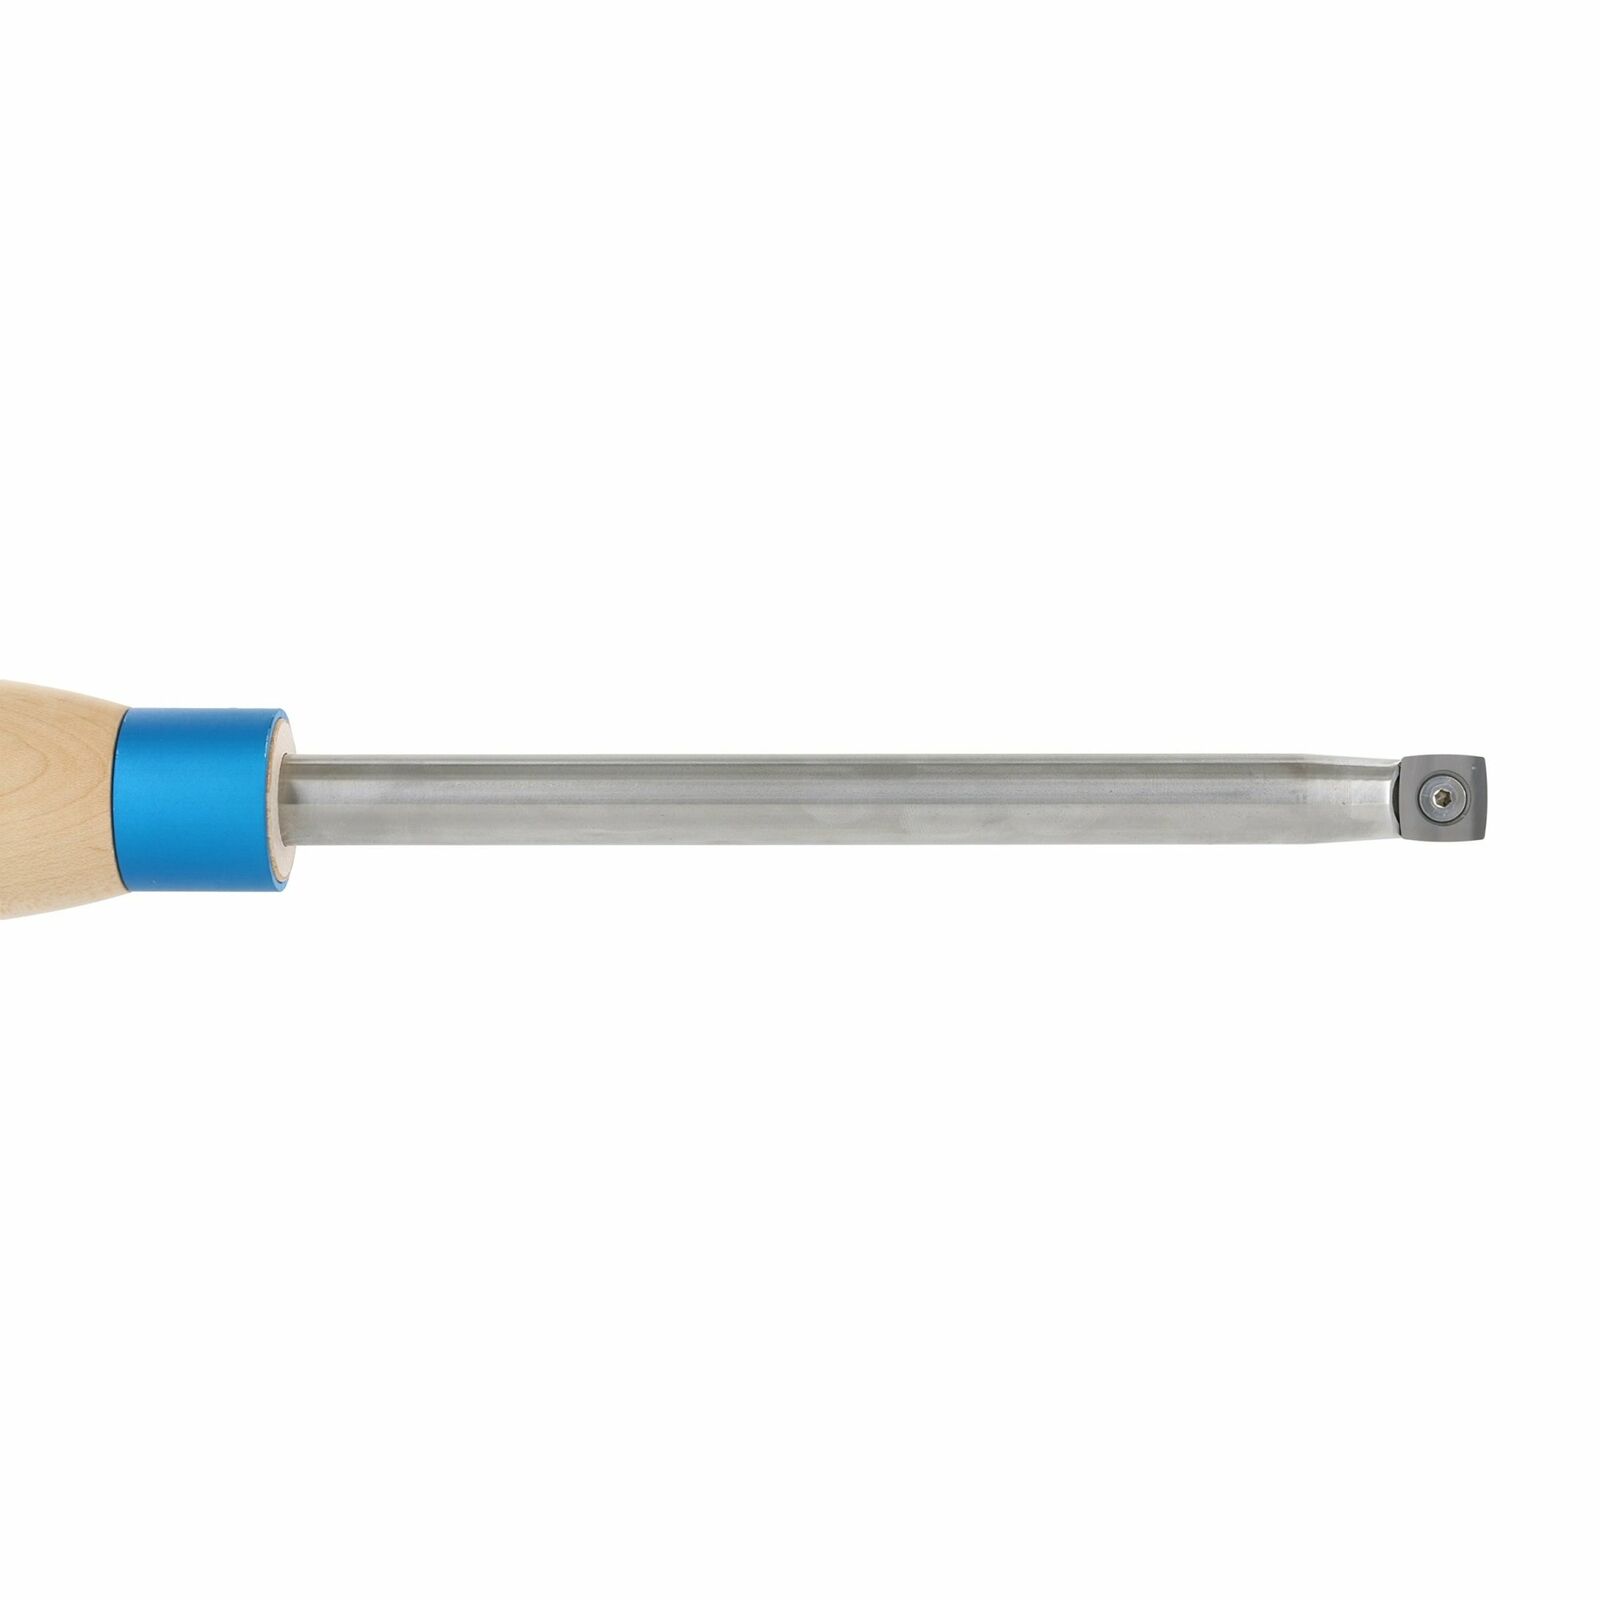 The Axe Full Size Square Carbide Tipped Turning Tool